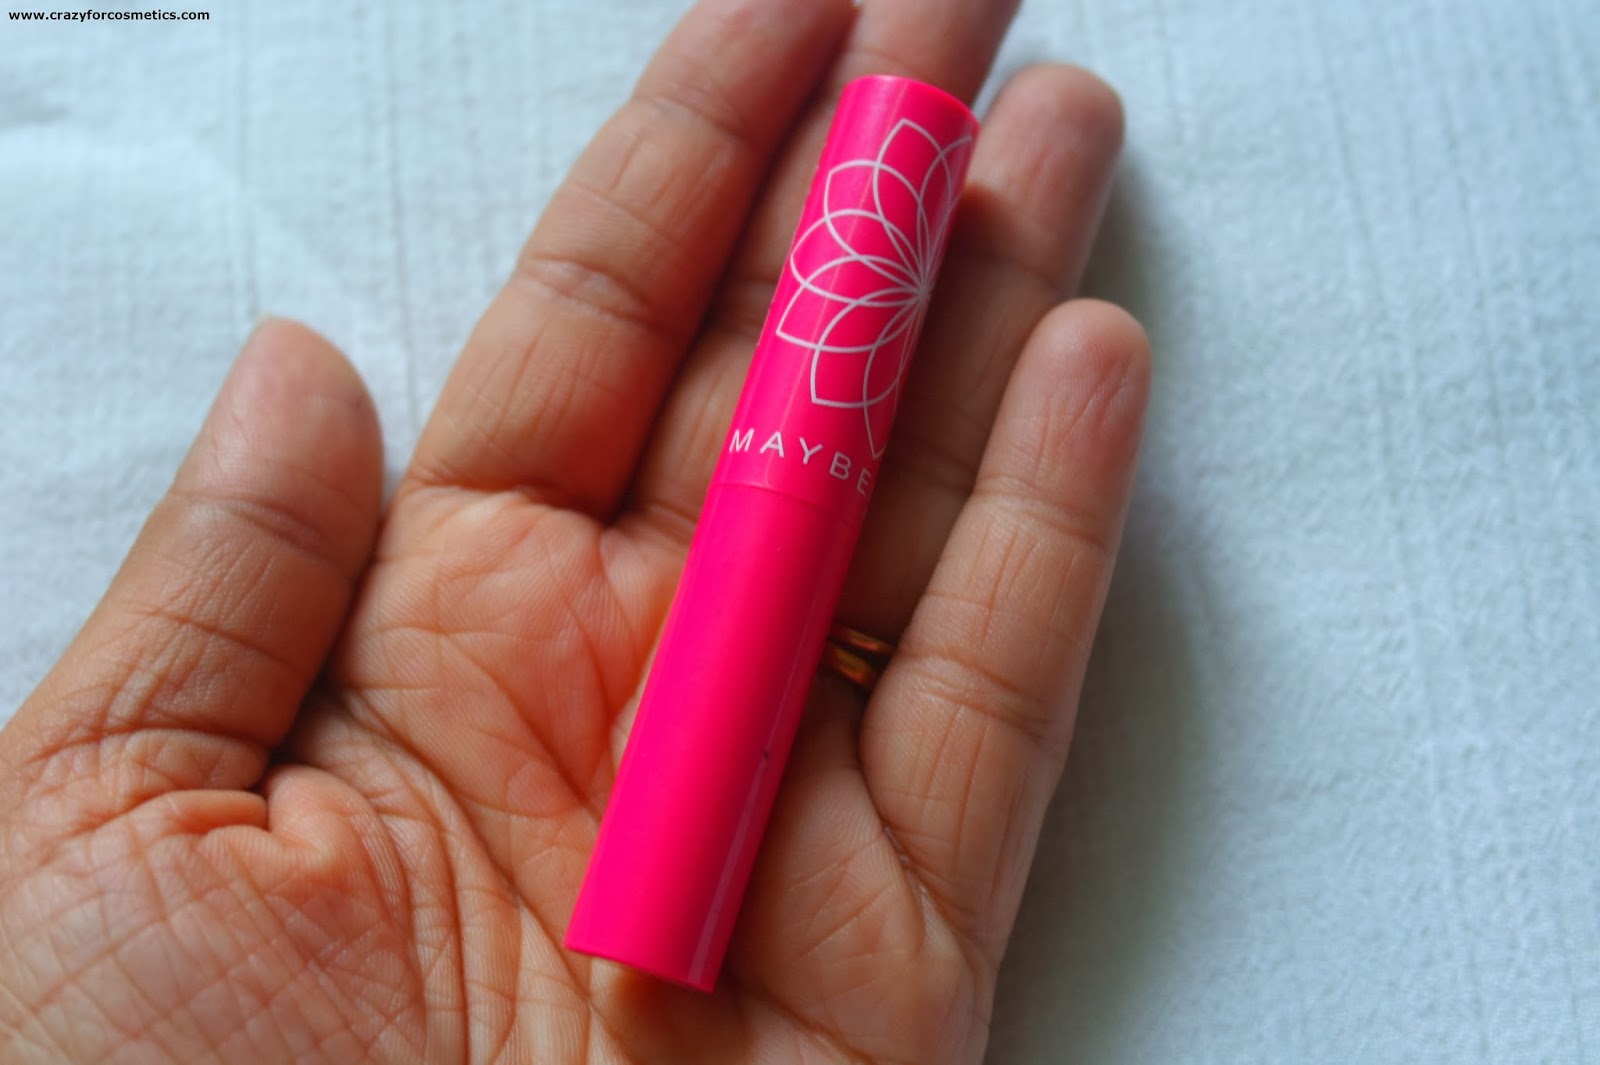 Maybelline Color Bloom Lipbalm in Pink blossom Review